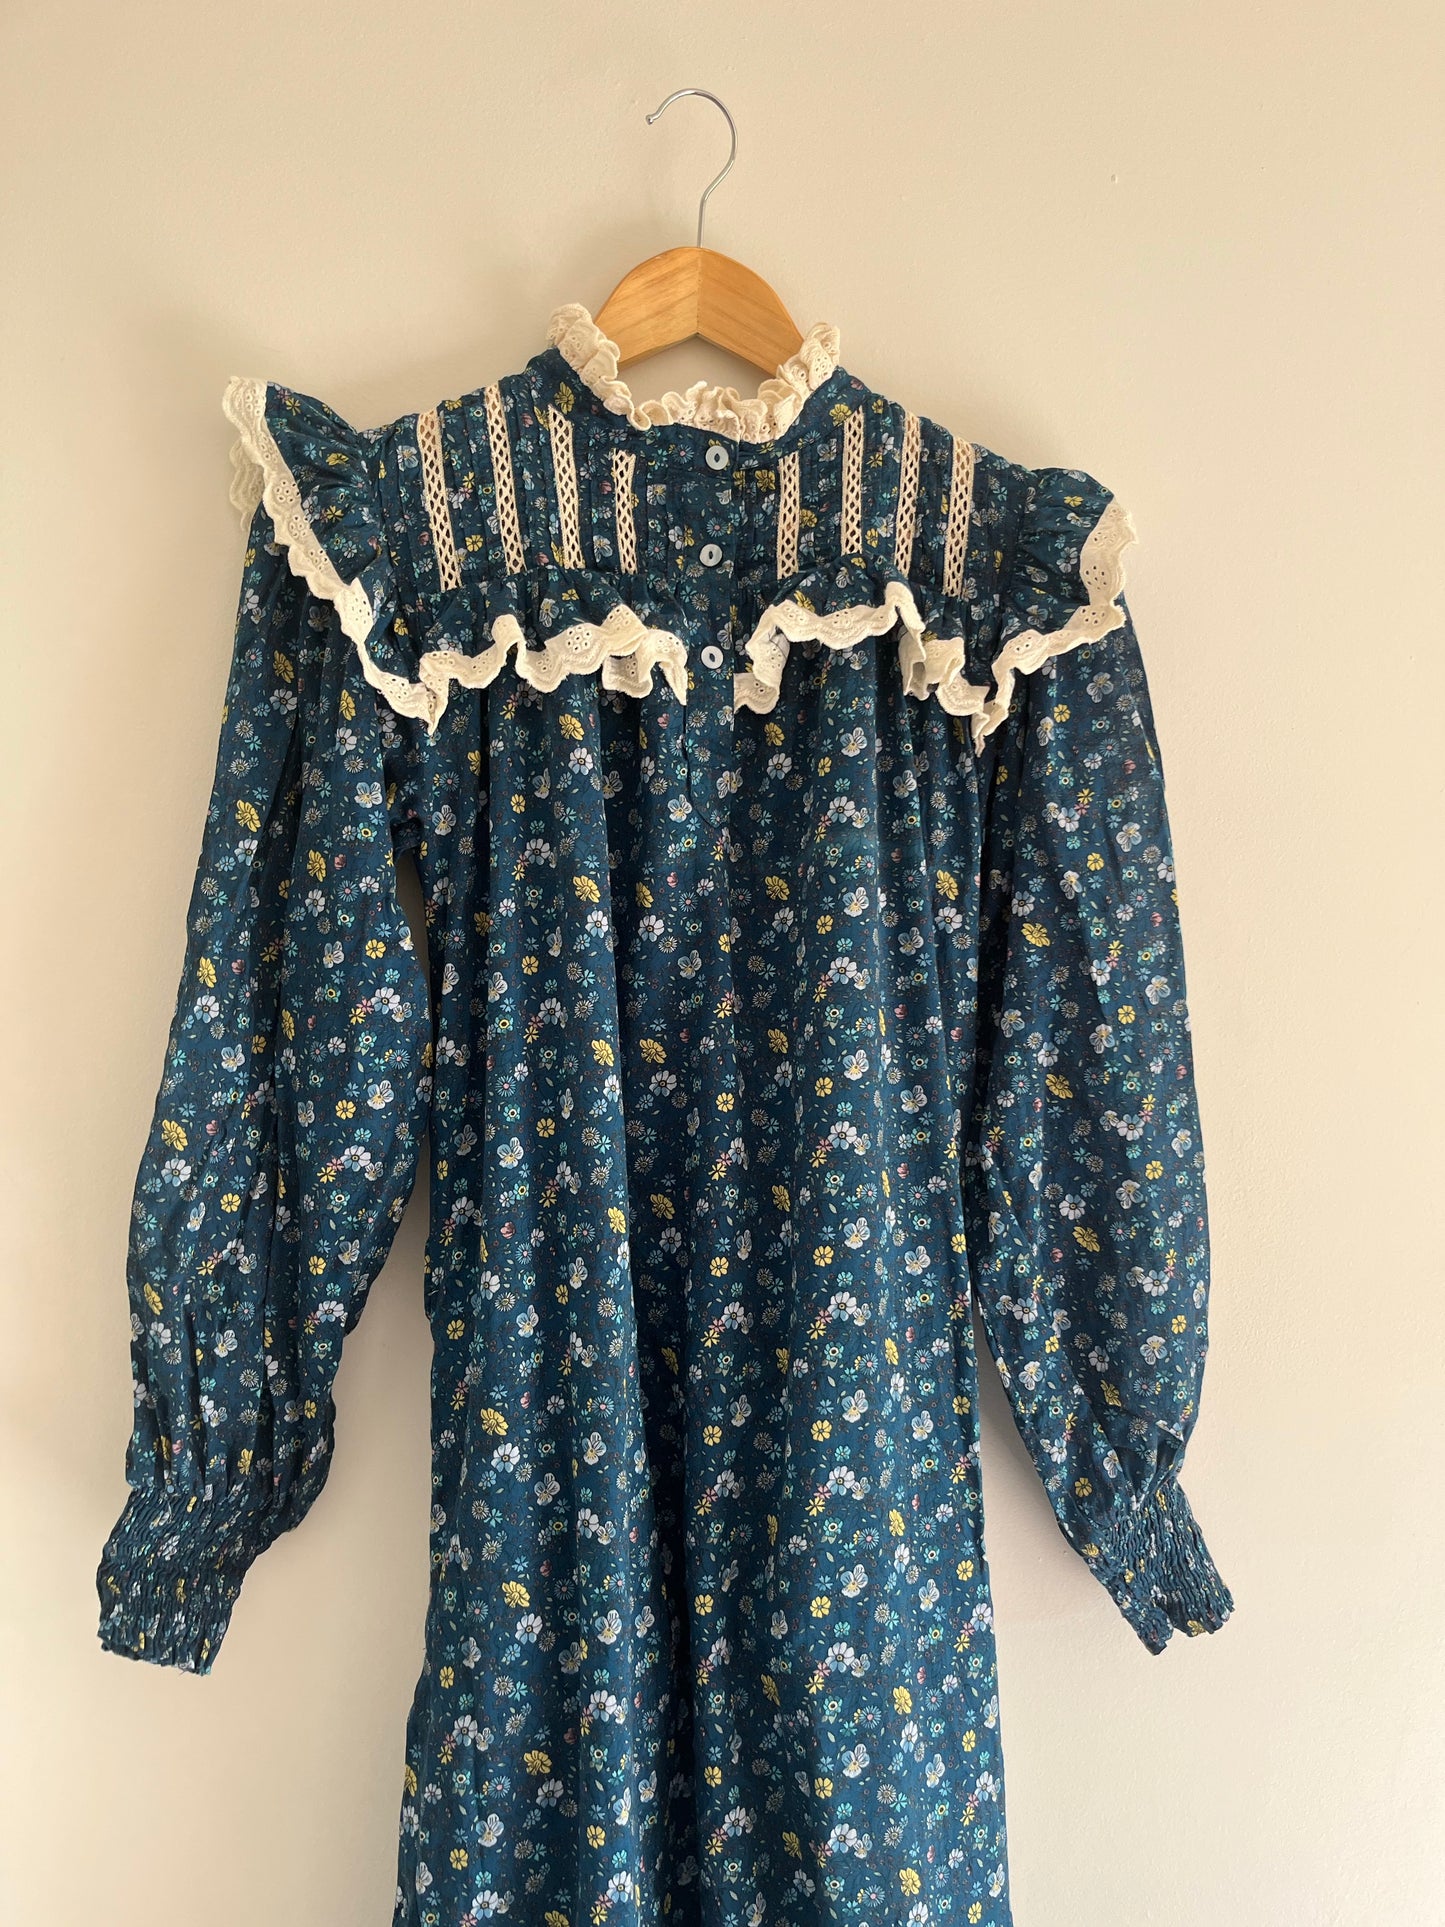 SECOND - 100% RECYCLED COTTON - CLOTHILDE DRESS BLUE FLORAL